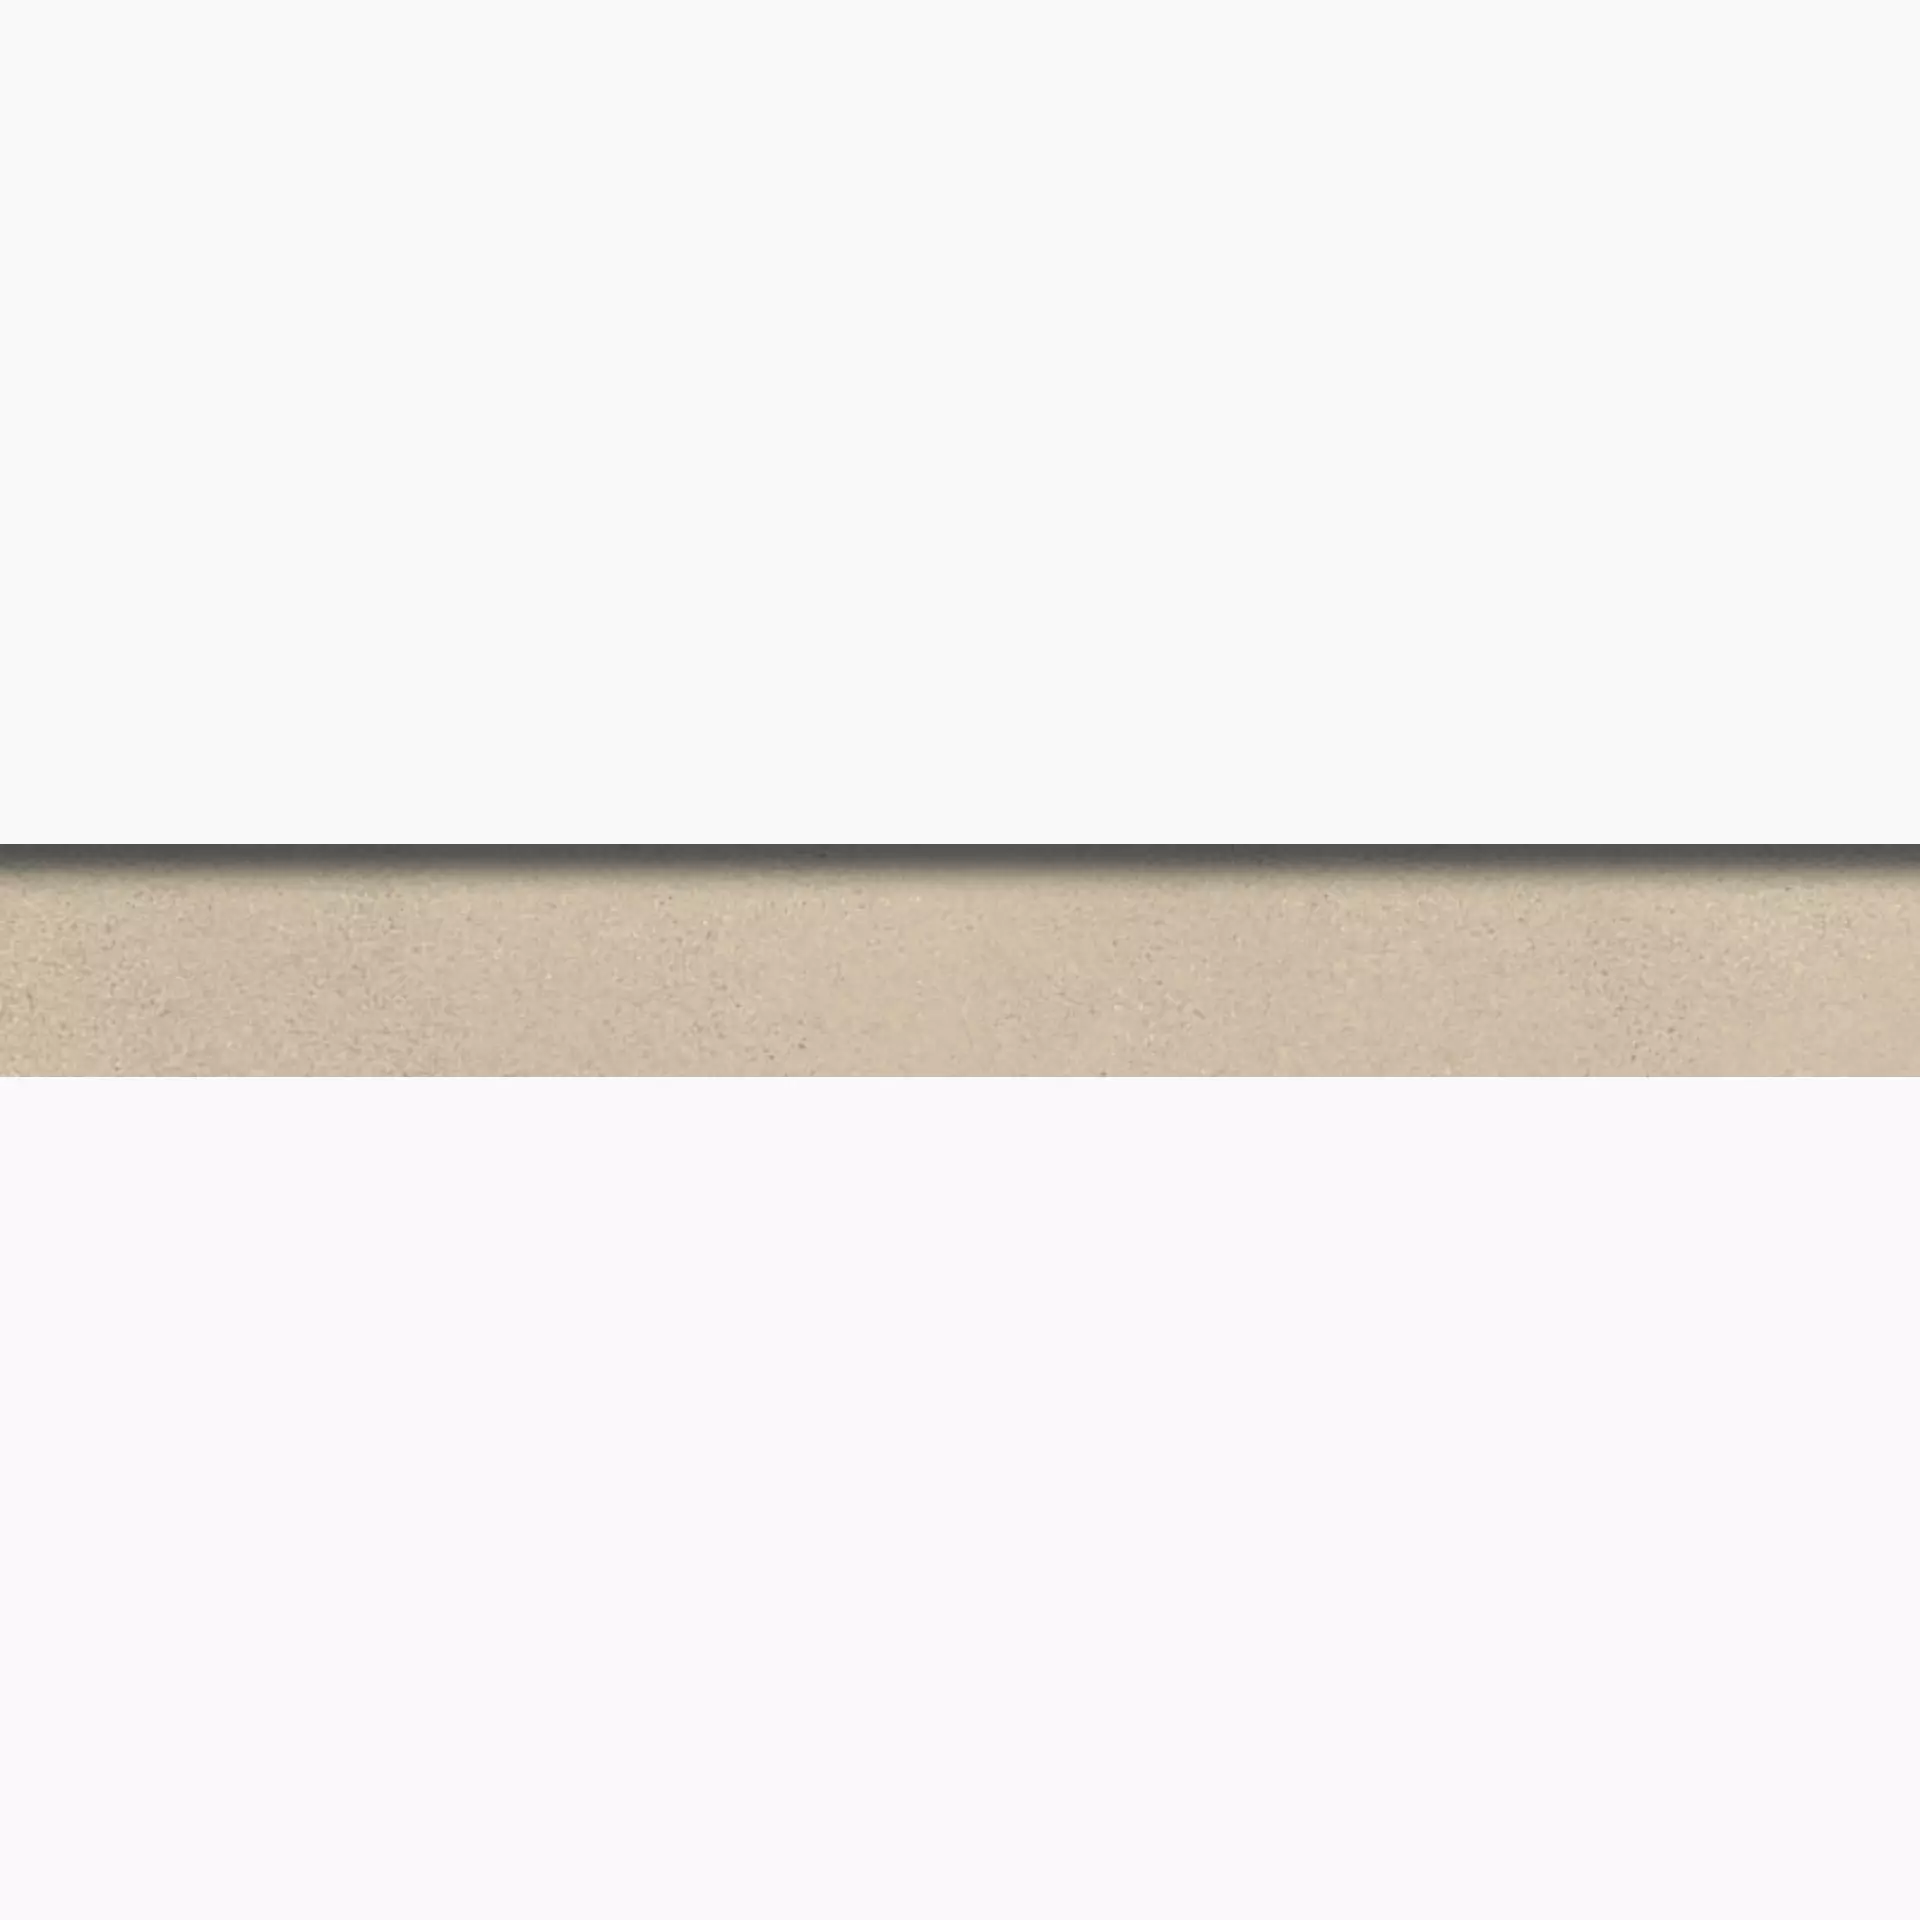 Sant Agostino Sable Beige Natural Skirting board CSABSABE90 7,3x90cm rectified 10mm